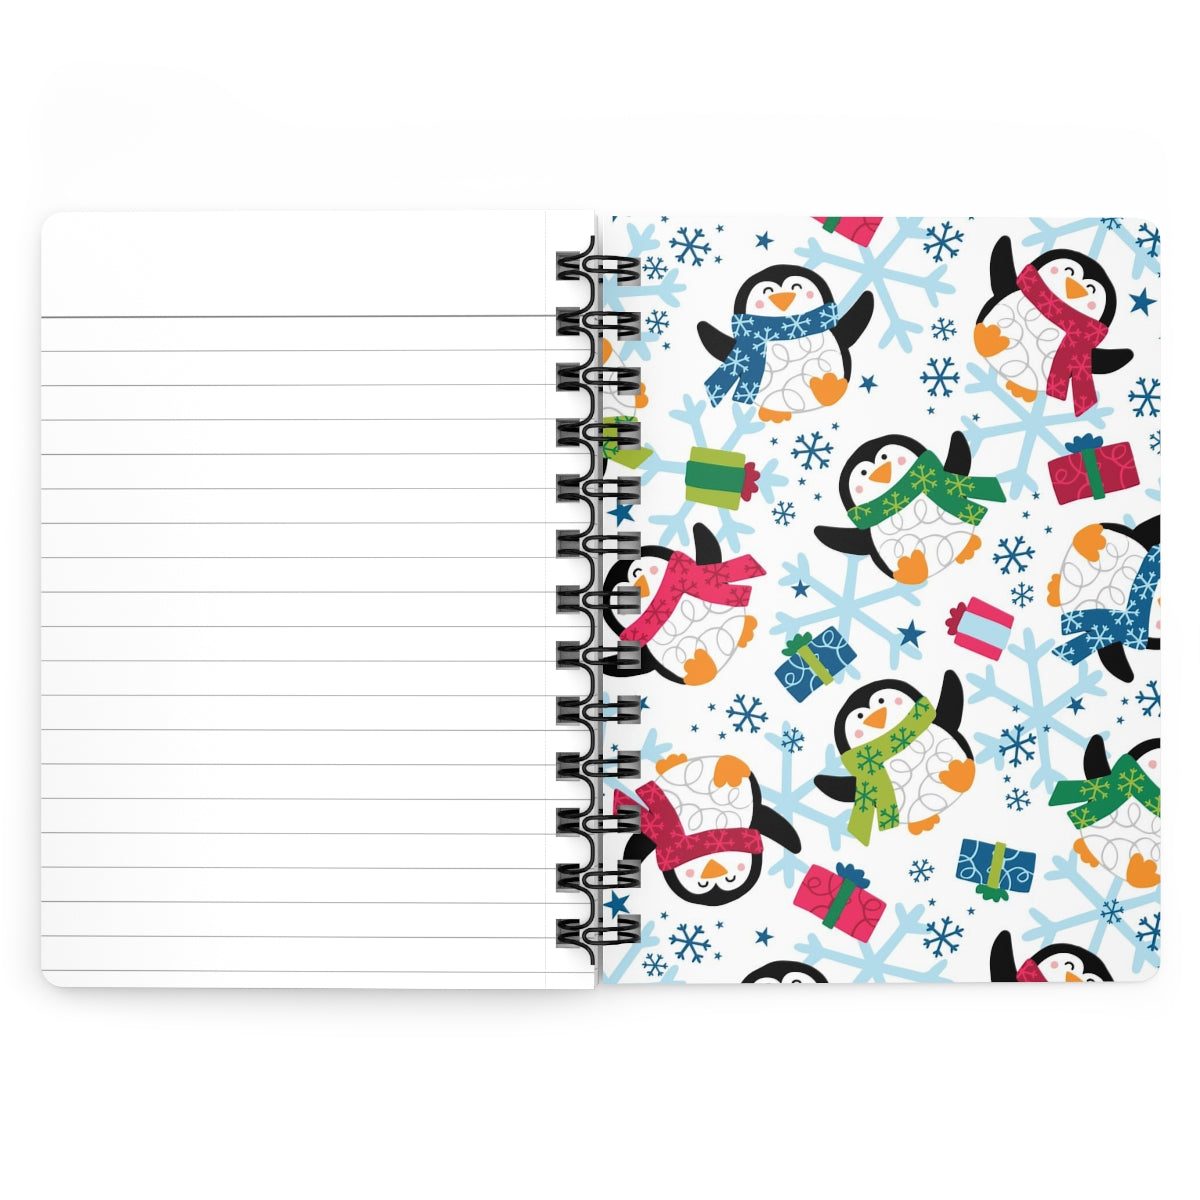 Penguins and Snowflakes Spiral Bound Journal